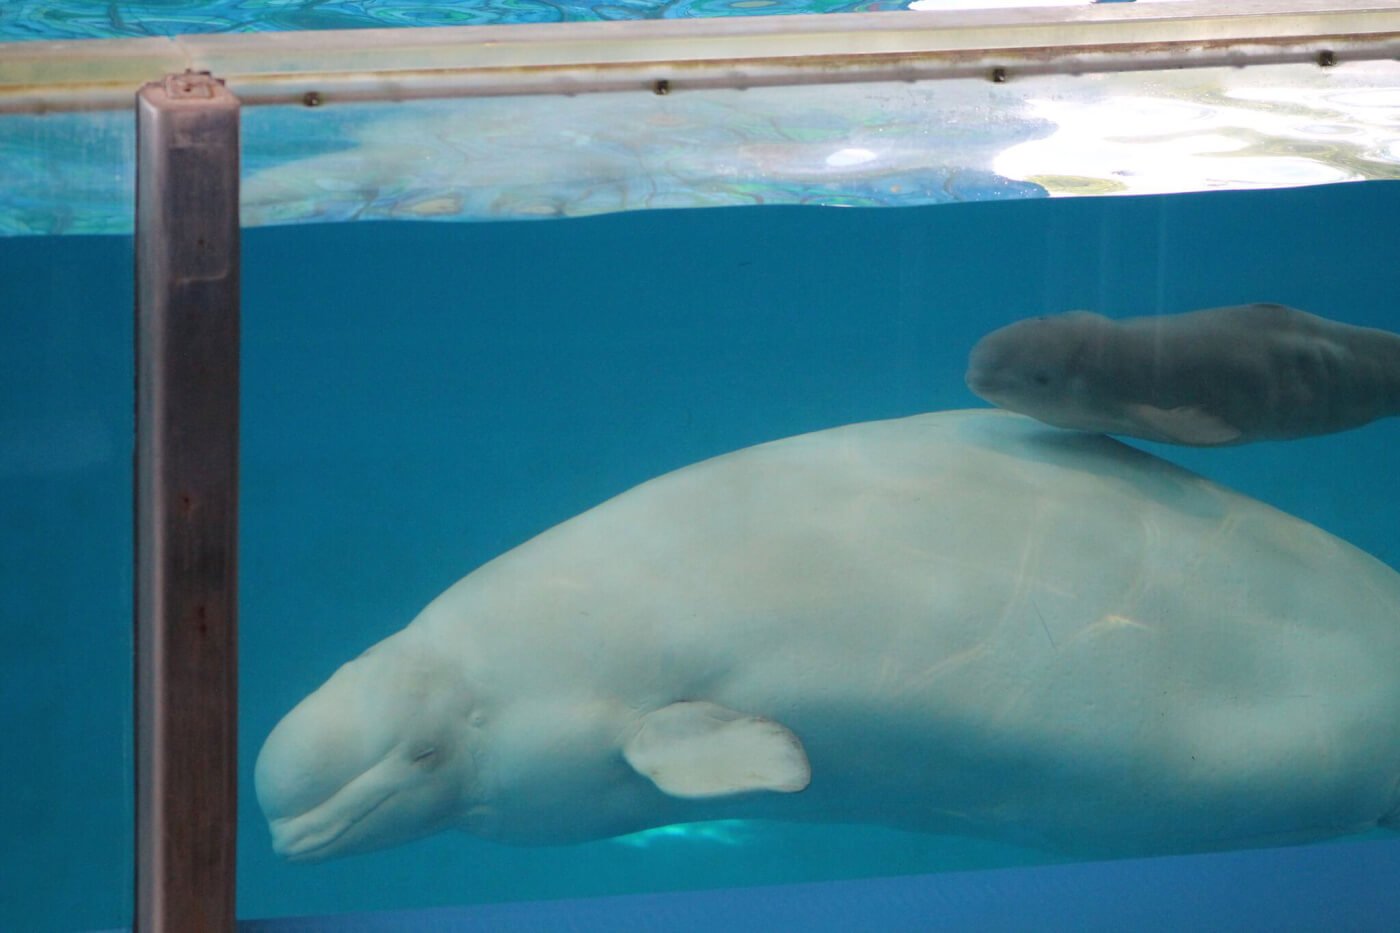 peta campaigns to save the whales at seaworld like these beluga whales